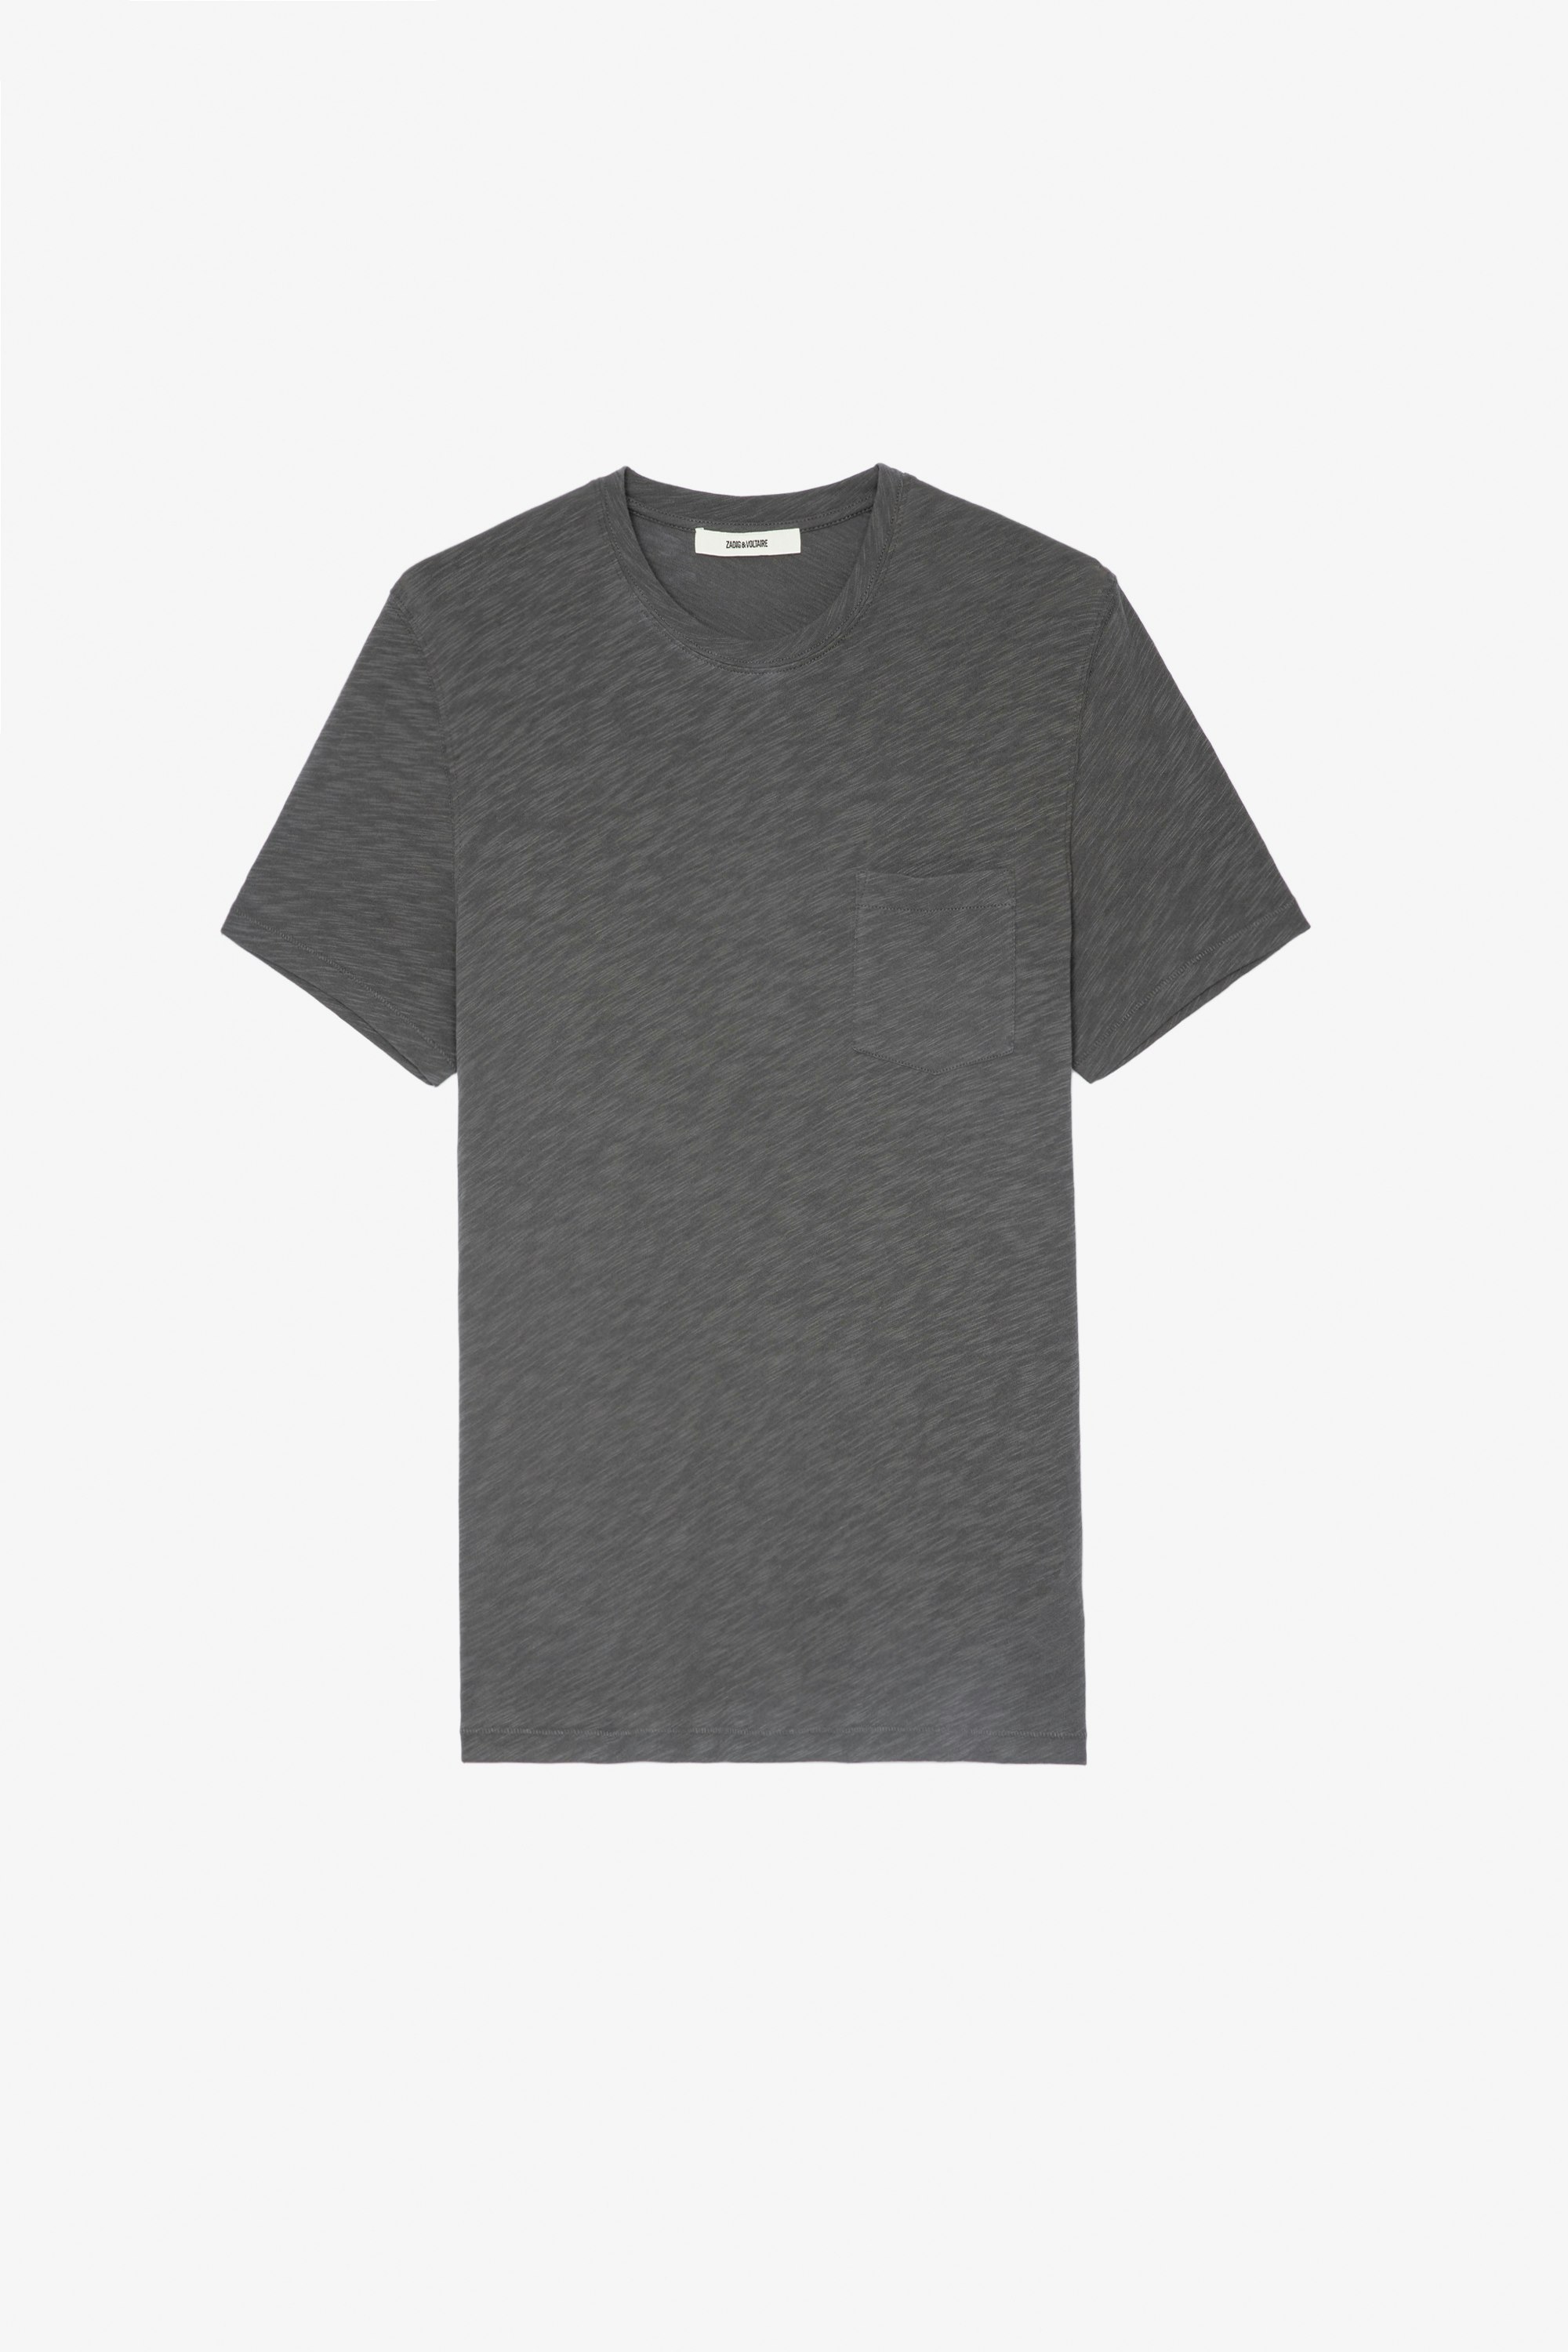 Stockholm Slub T-Shirt Men's grey slubbed cotton T-shirt with round neckline, short sleeves and a skull print on the back